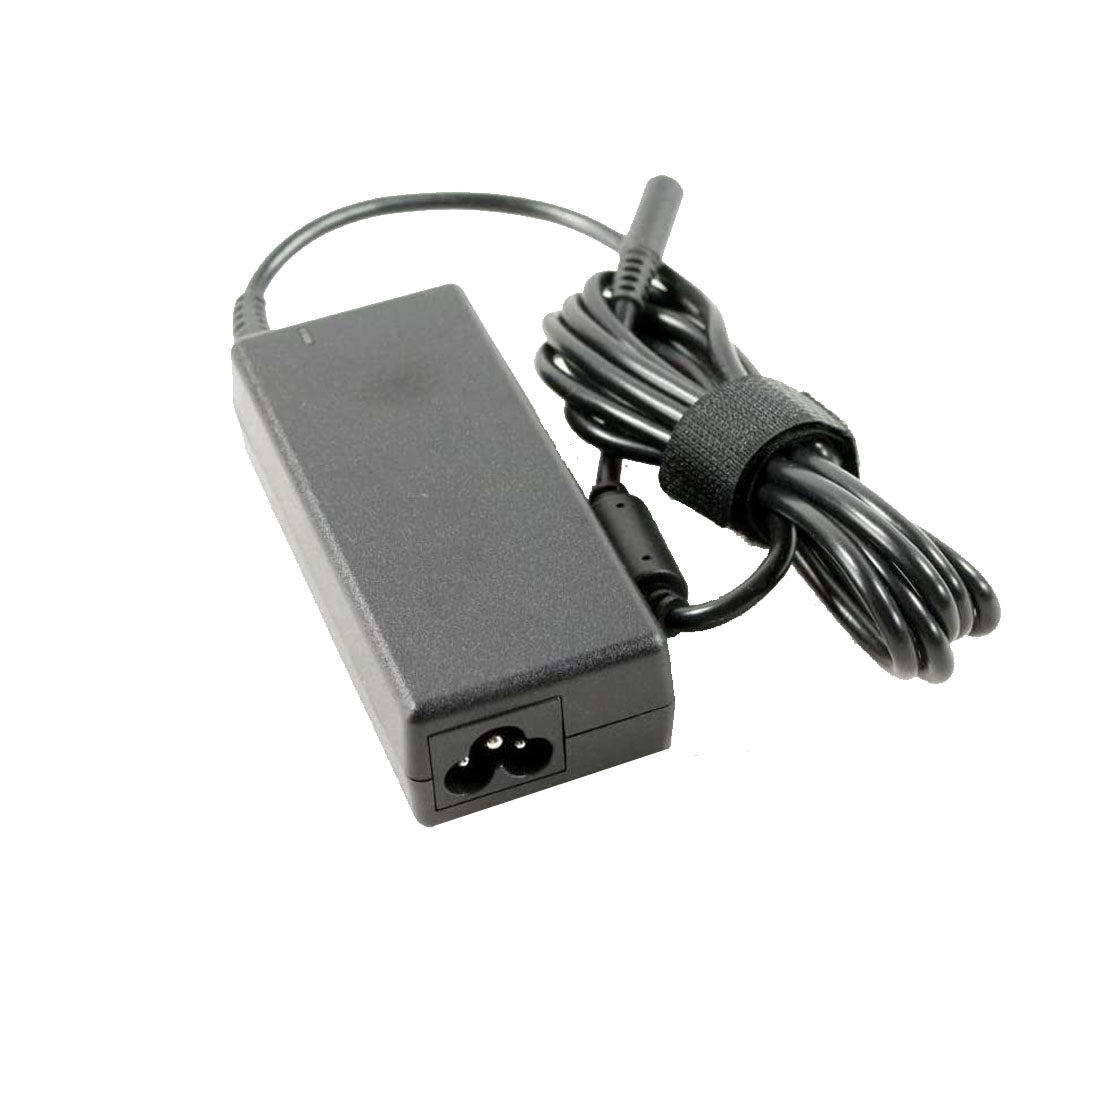 Dell Original 65W 19.5V 4.5mm Pin Laptop Charger Adapter for Inspiron 17 7773 With Power Cord